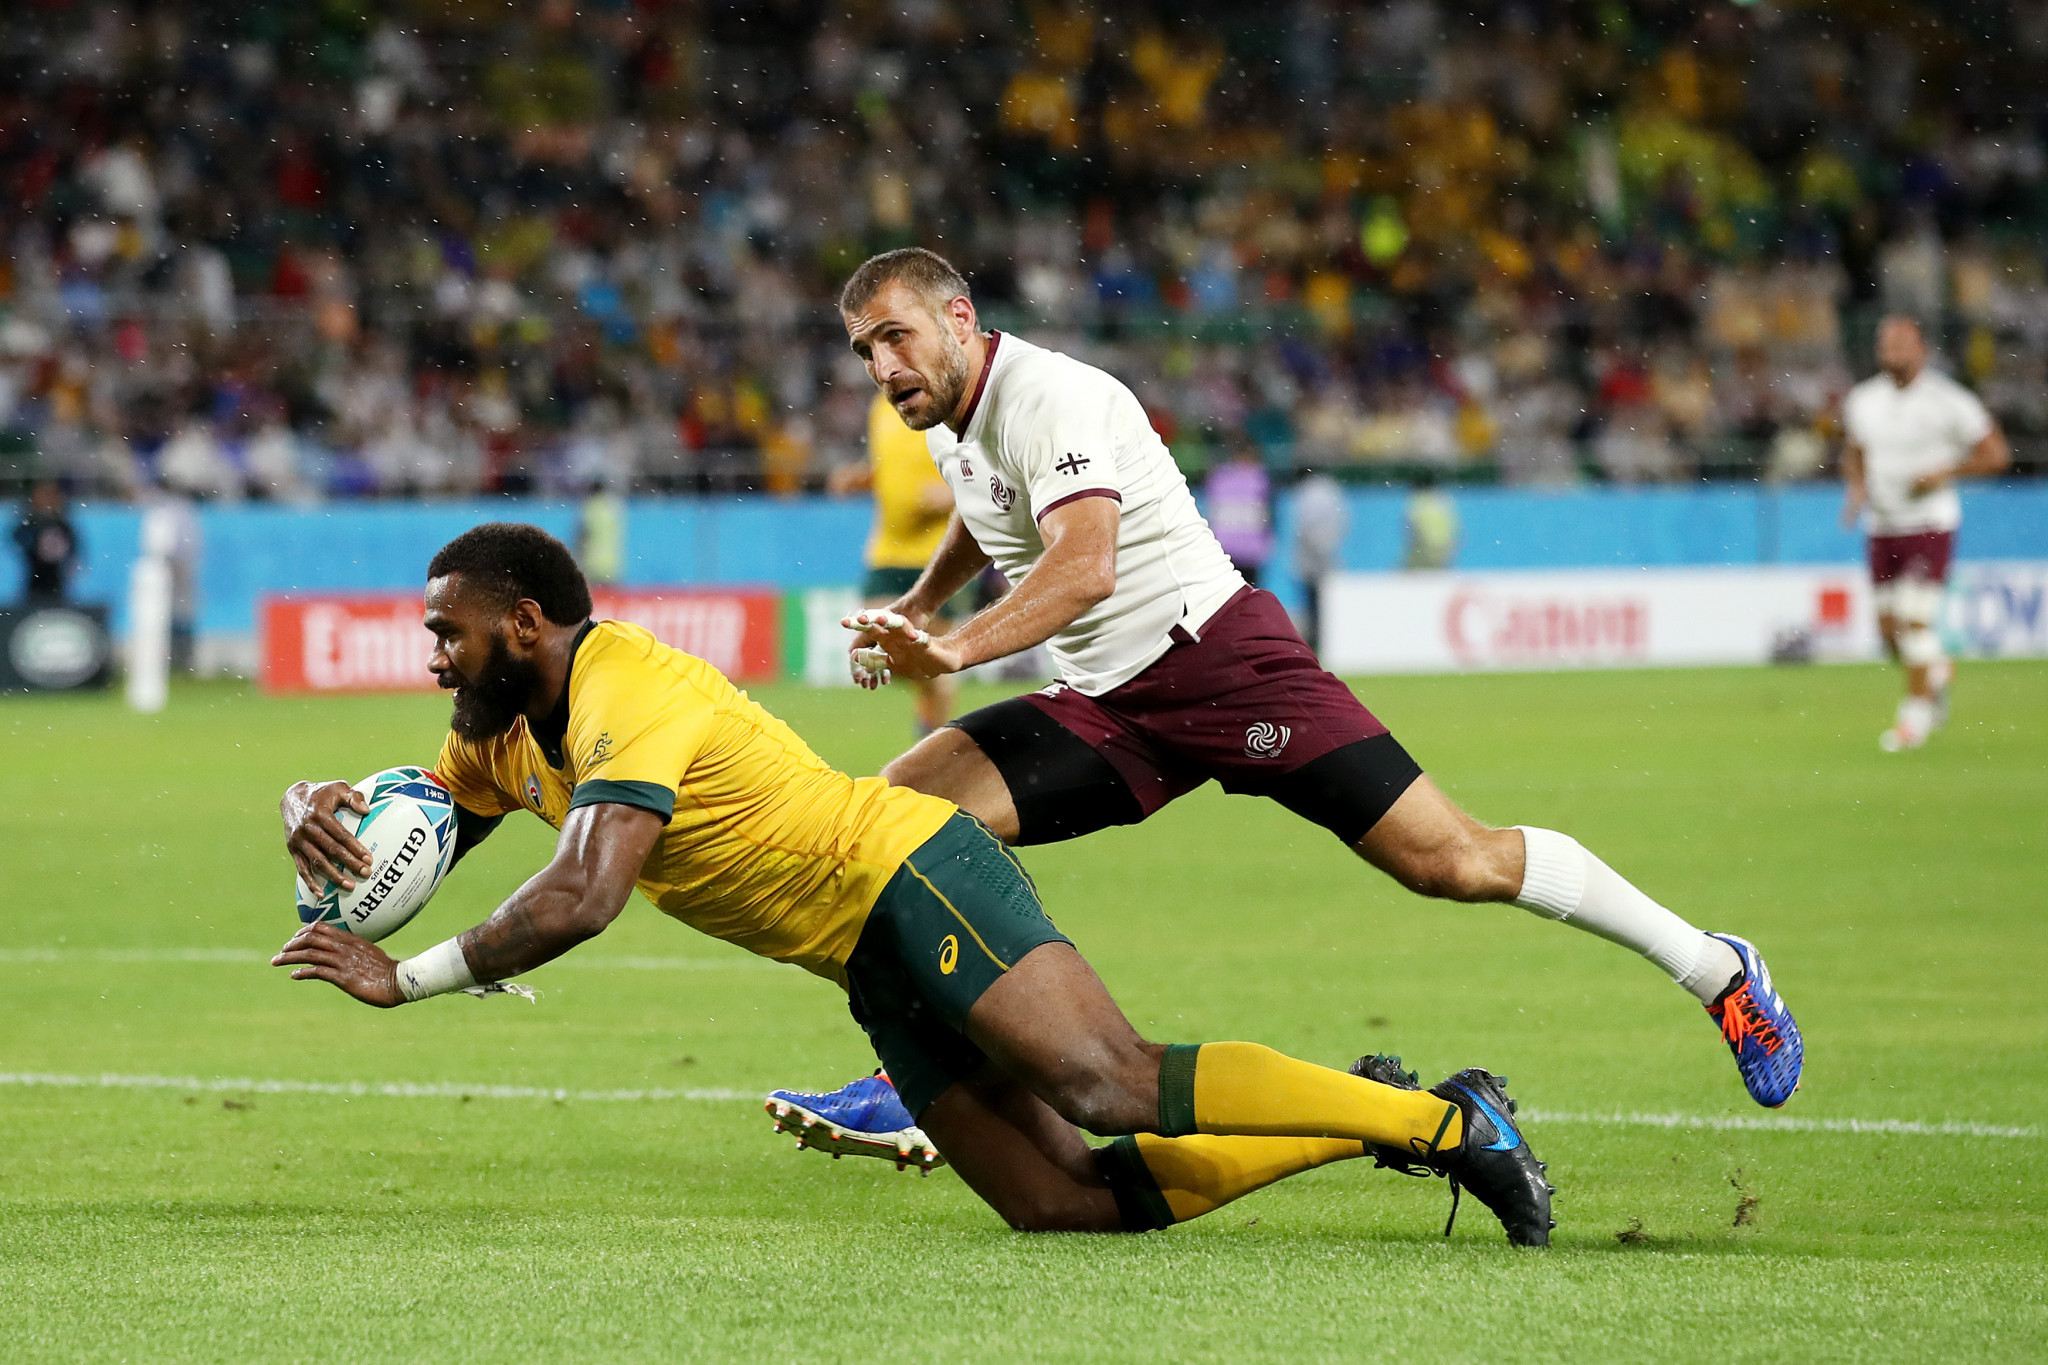 Marika Koroibete's try was one of the high points for Australia ©Getty Images